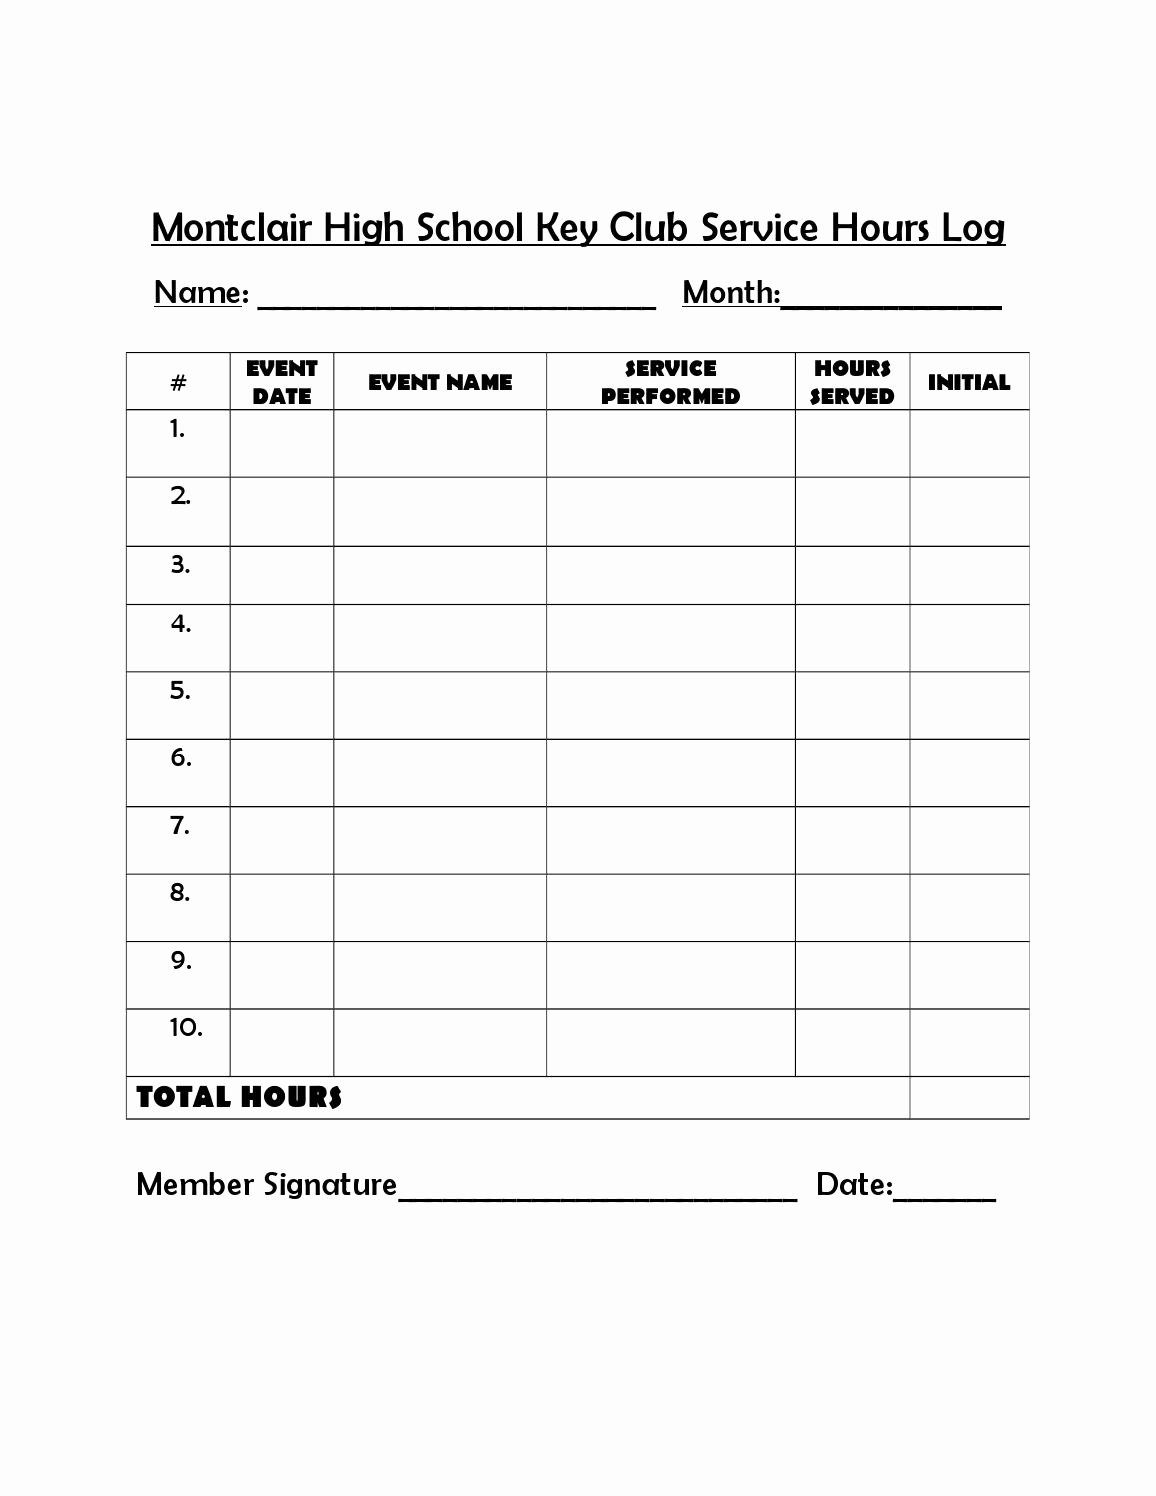 Tracking Volunteer Hours Template New Key Club Service Hours Log by Jane issuu